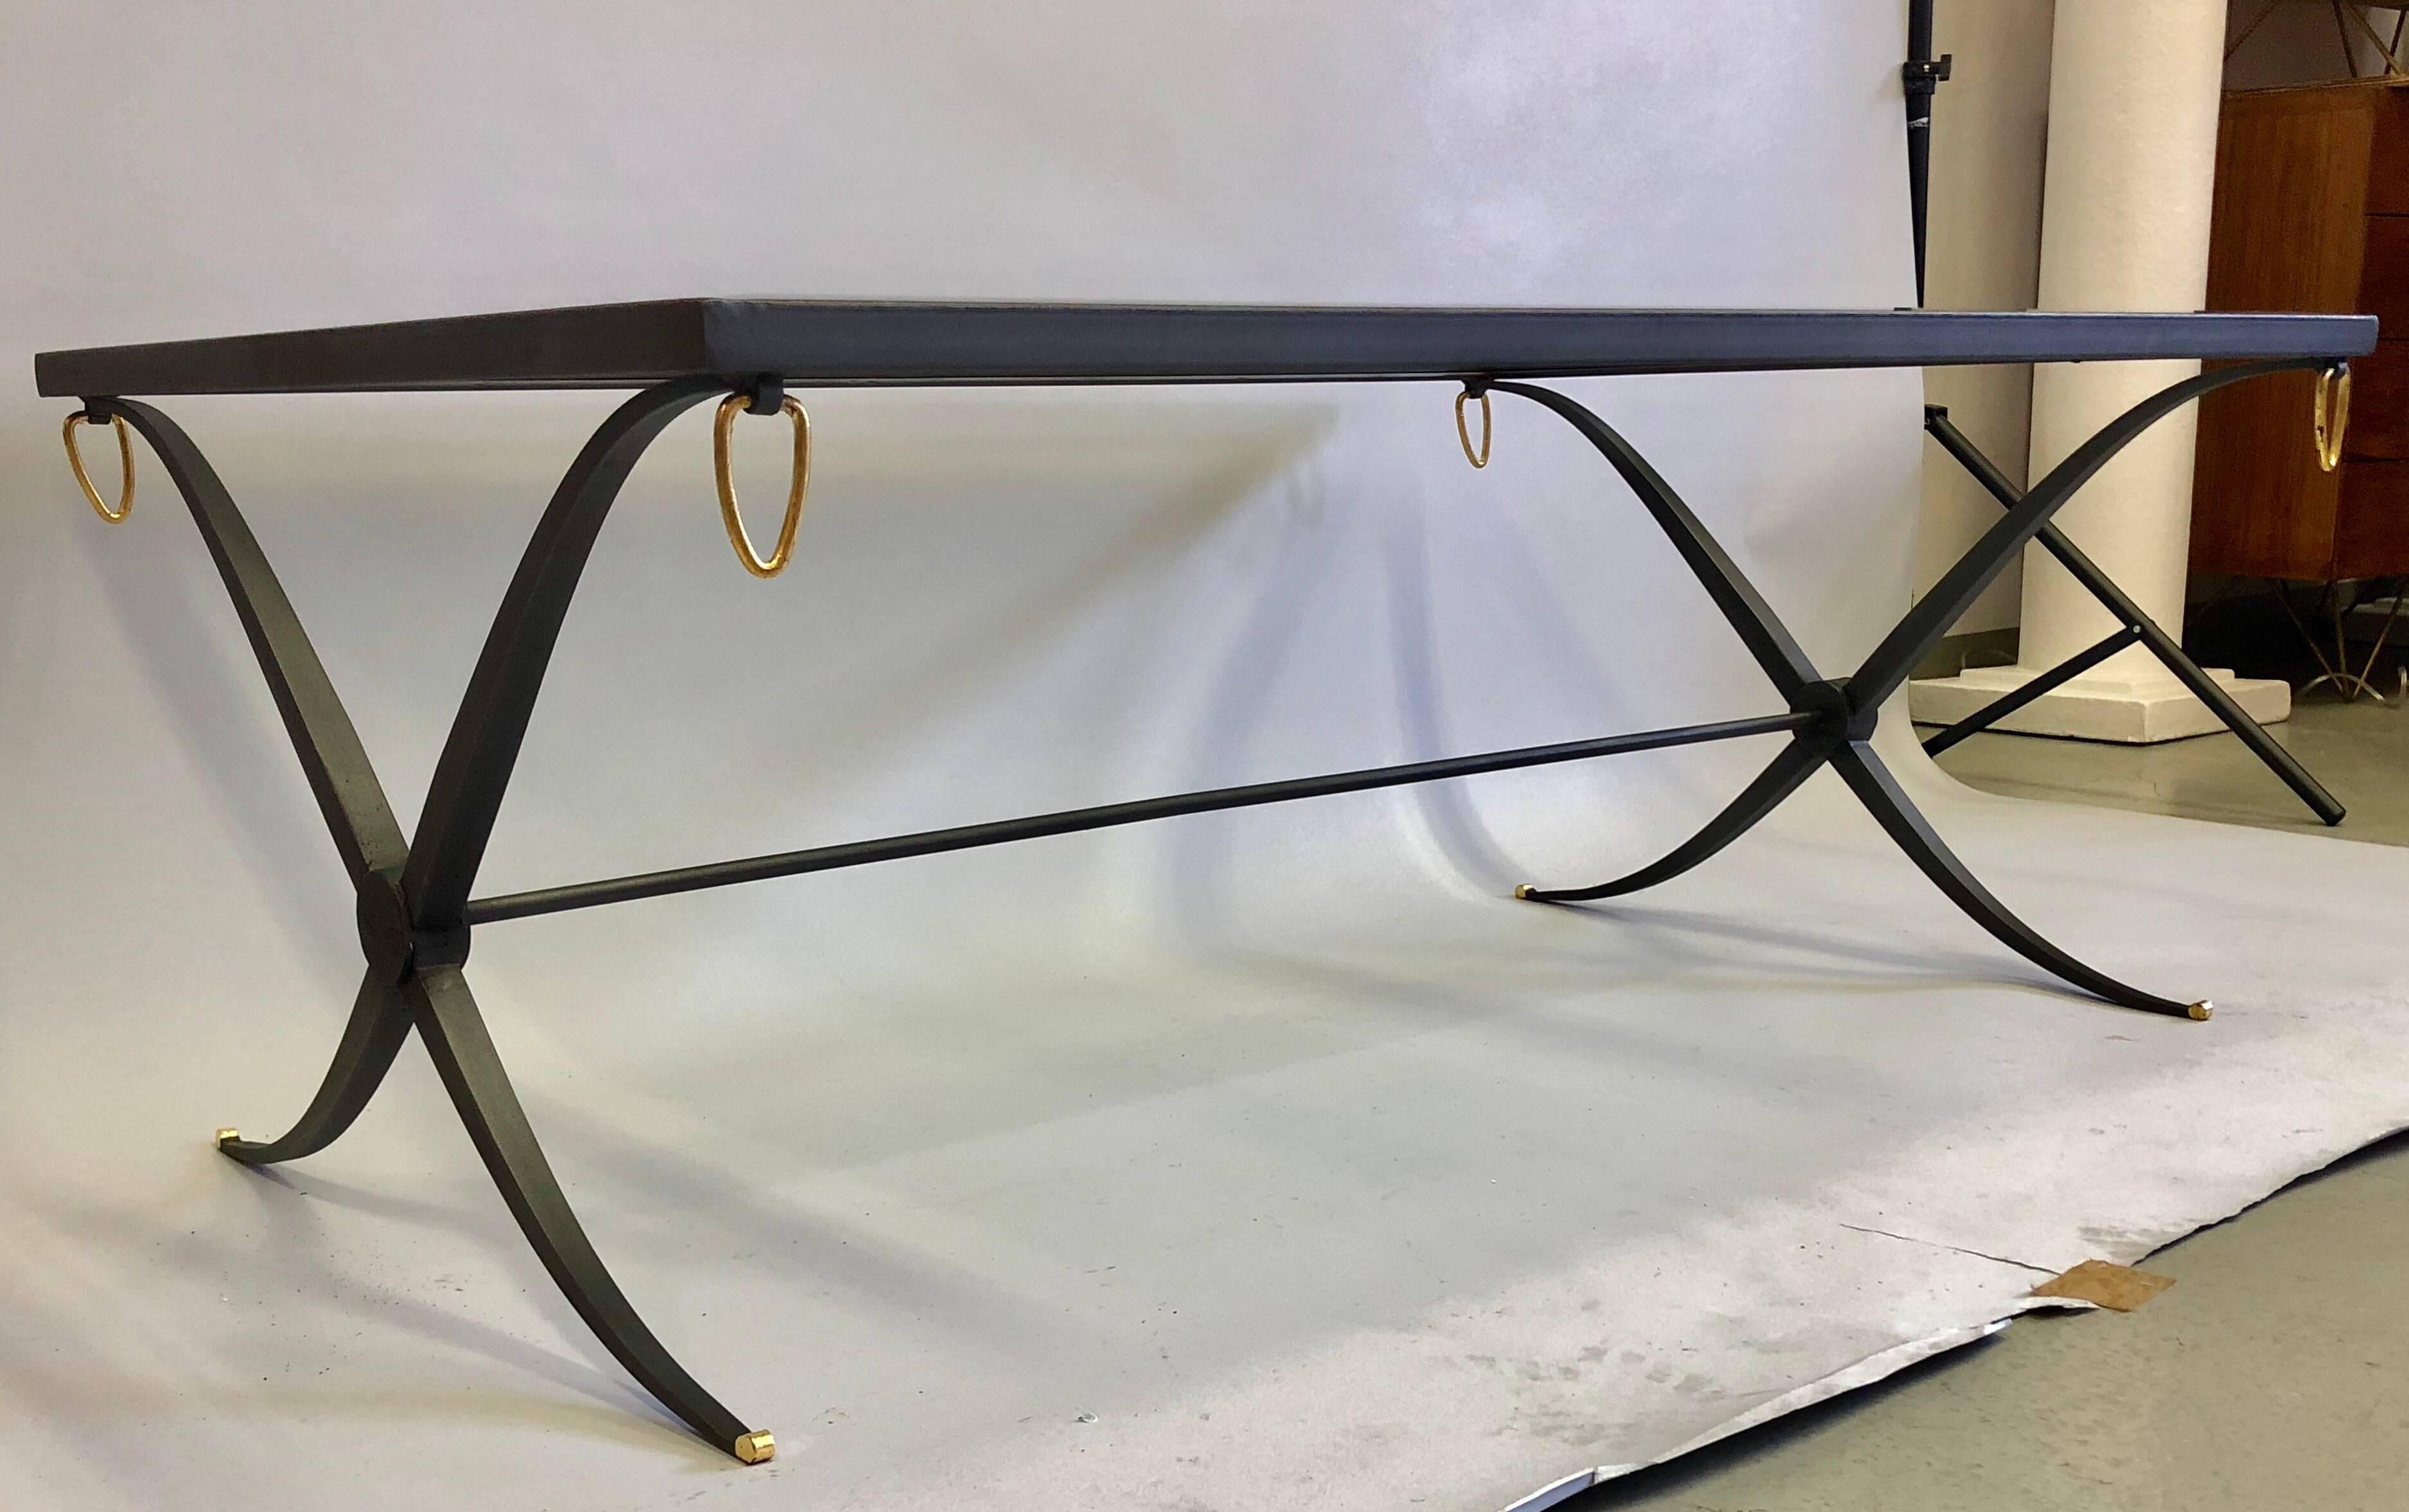 Elegant French Mid-Century Modern Neoclassical wrought iron cocktail table attributed to Raymond Subes. The piece presents a pure form in classic styling that bridges modernism and classicism with a trend setting, minimal aesthetic.  The table has a